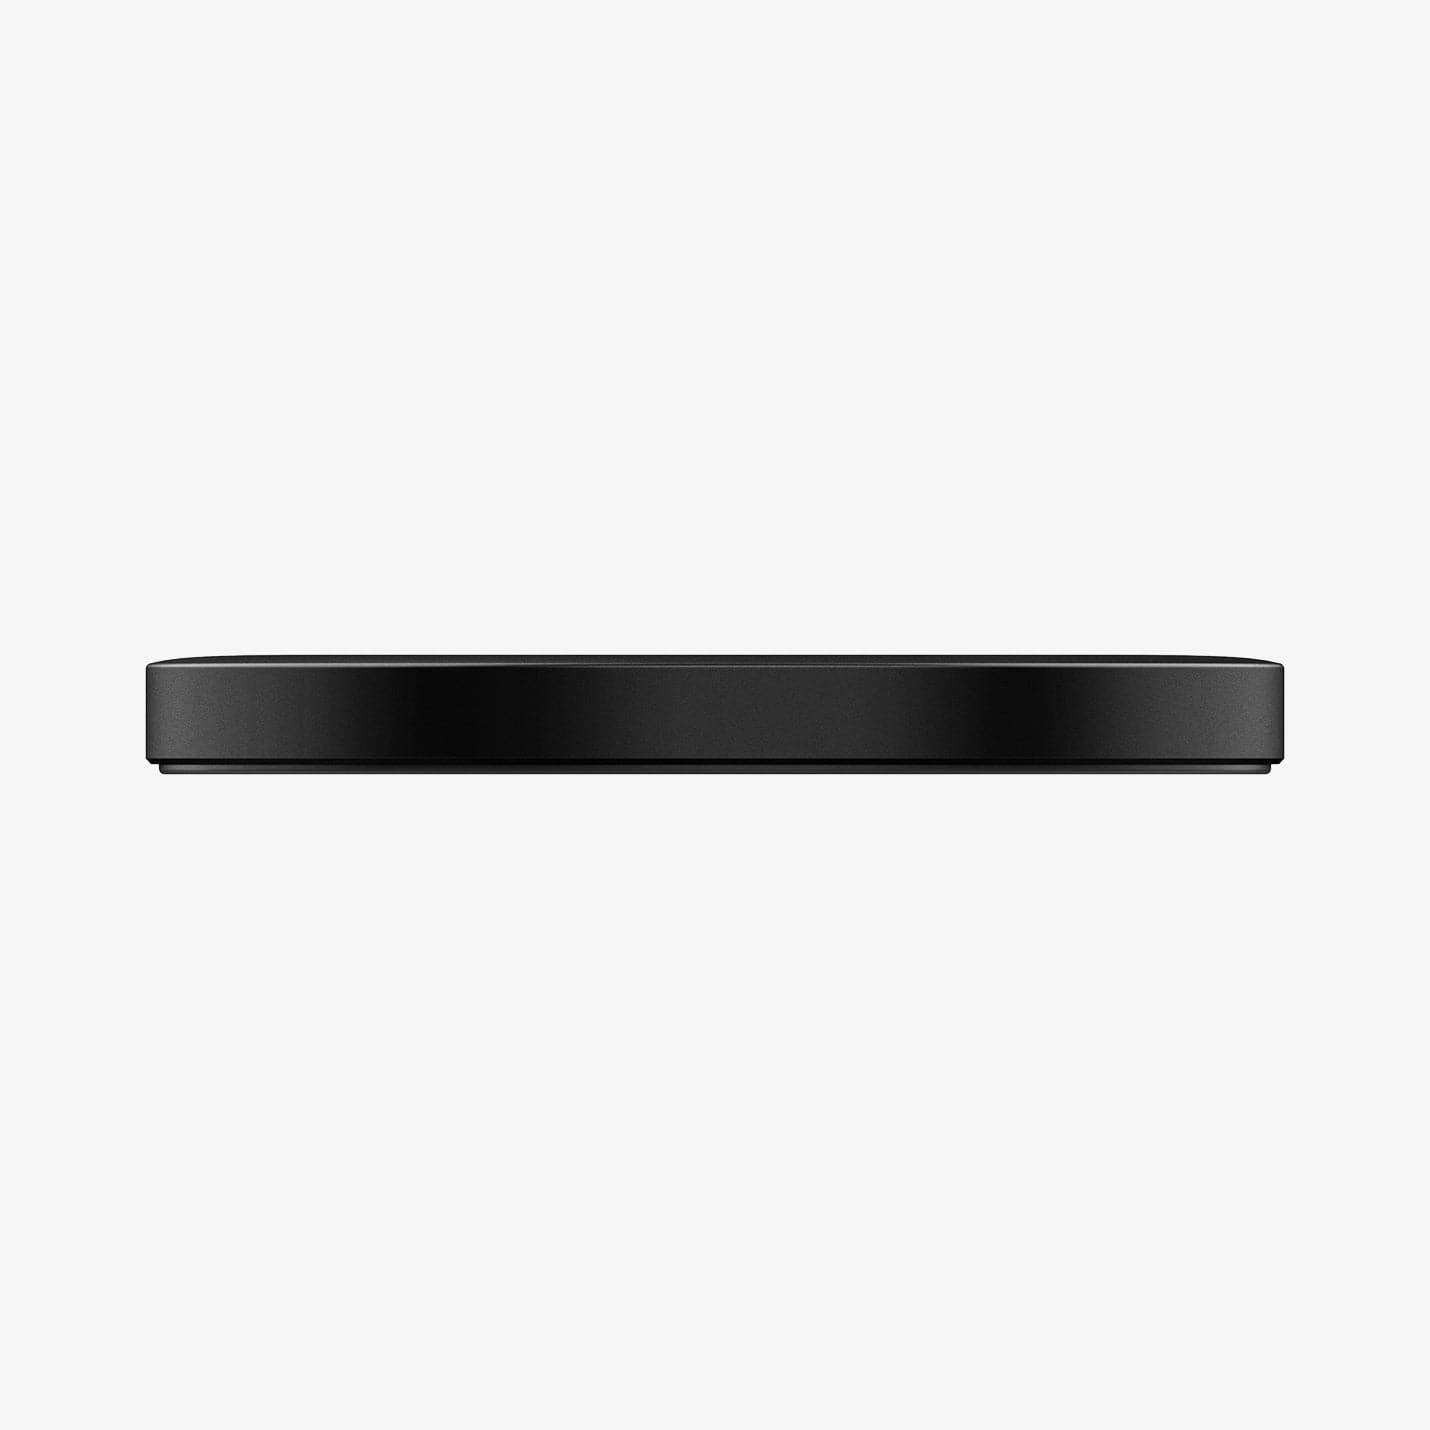 ACH02190 - ArcField™ Magnetic Wireless Charger PF2009 (MagFit) in black showing the side